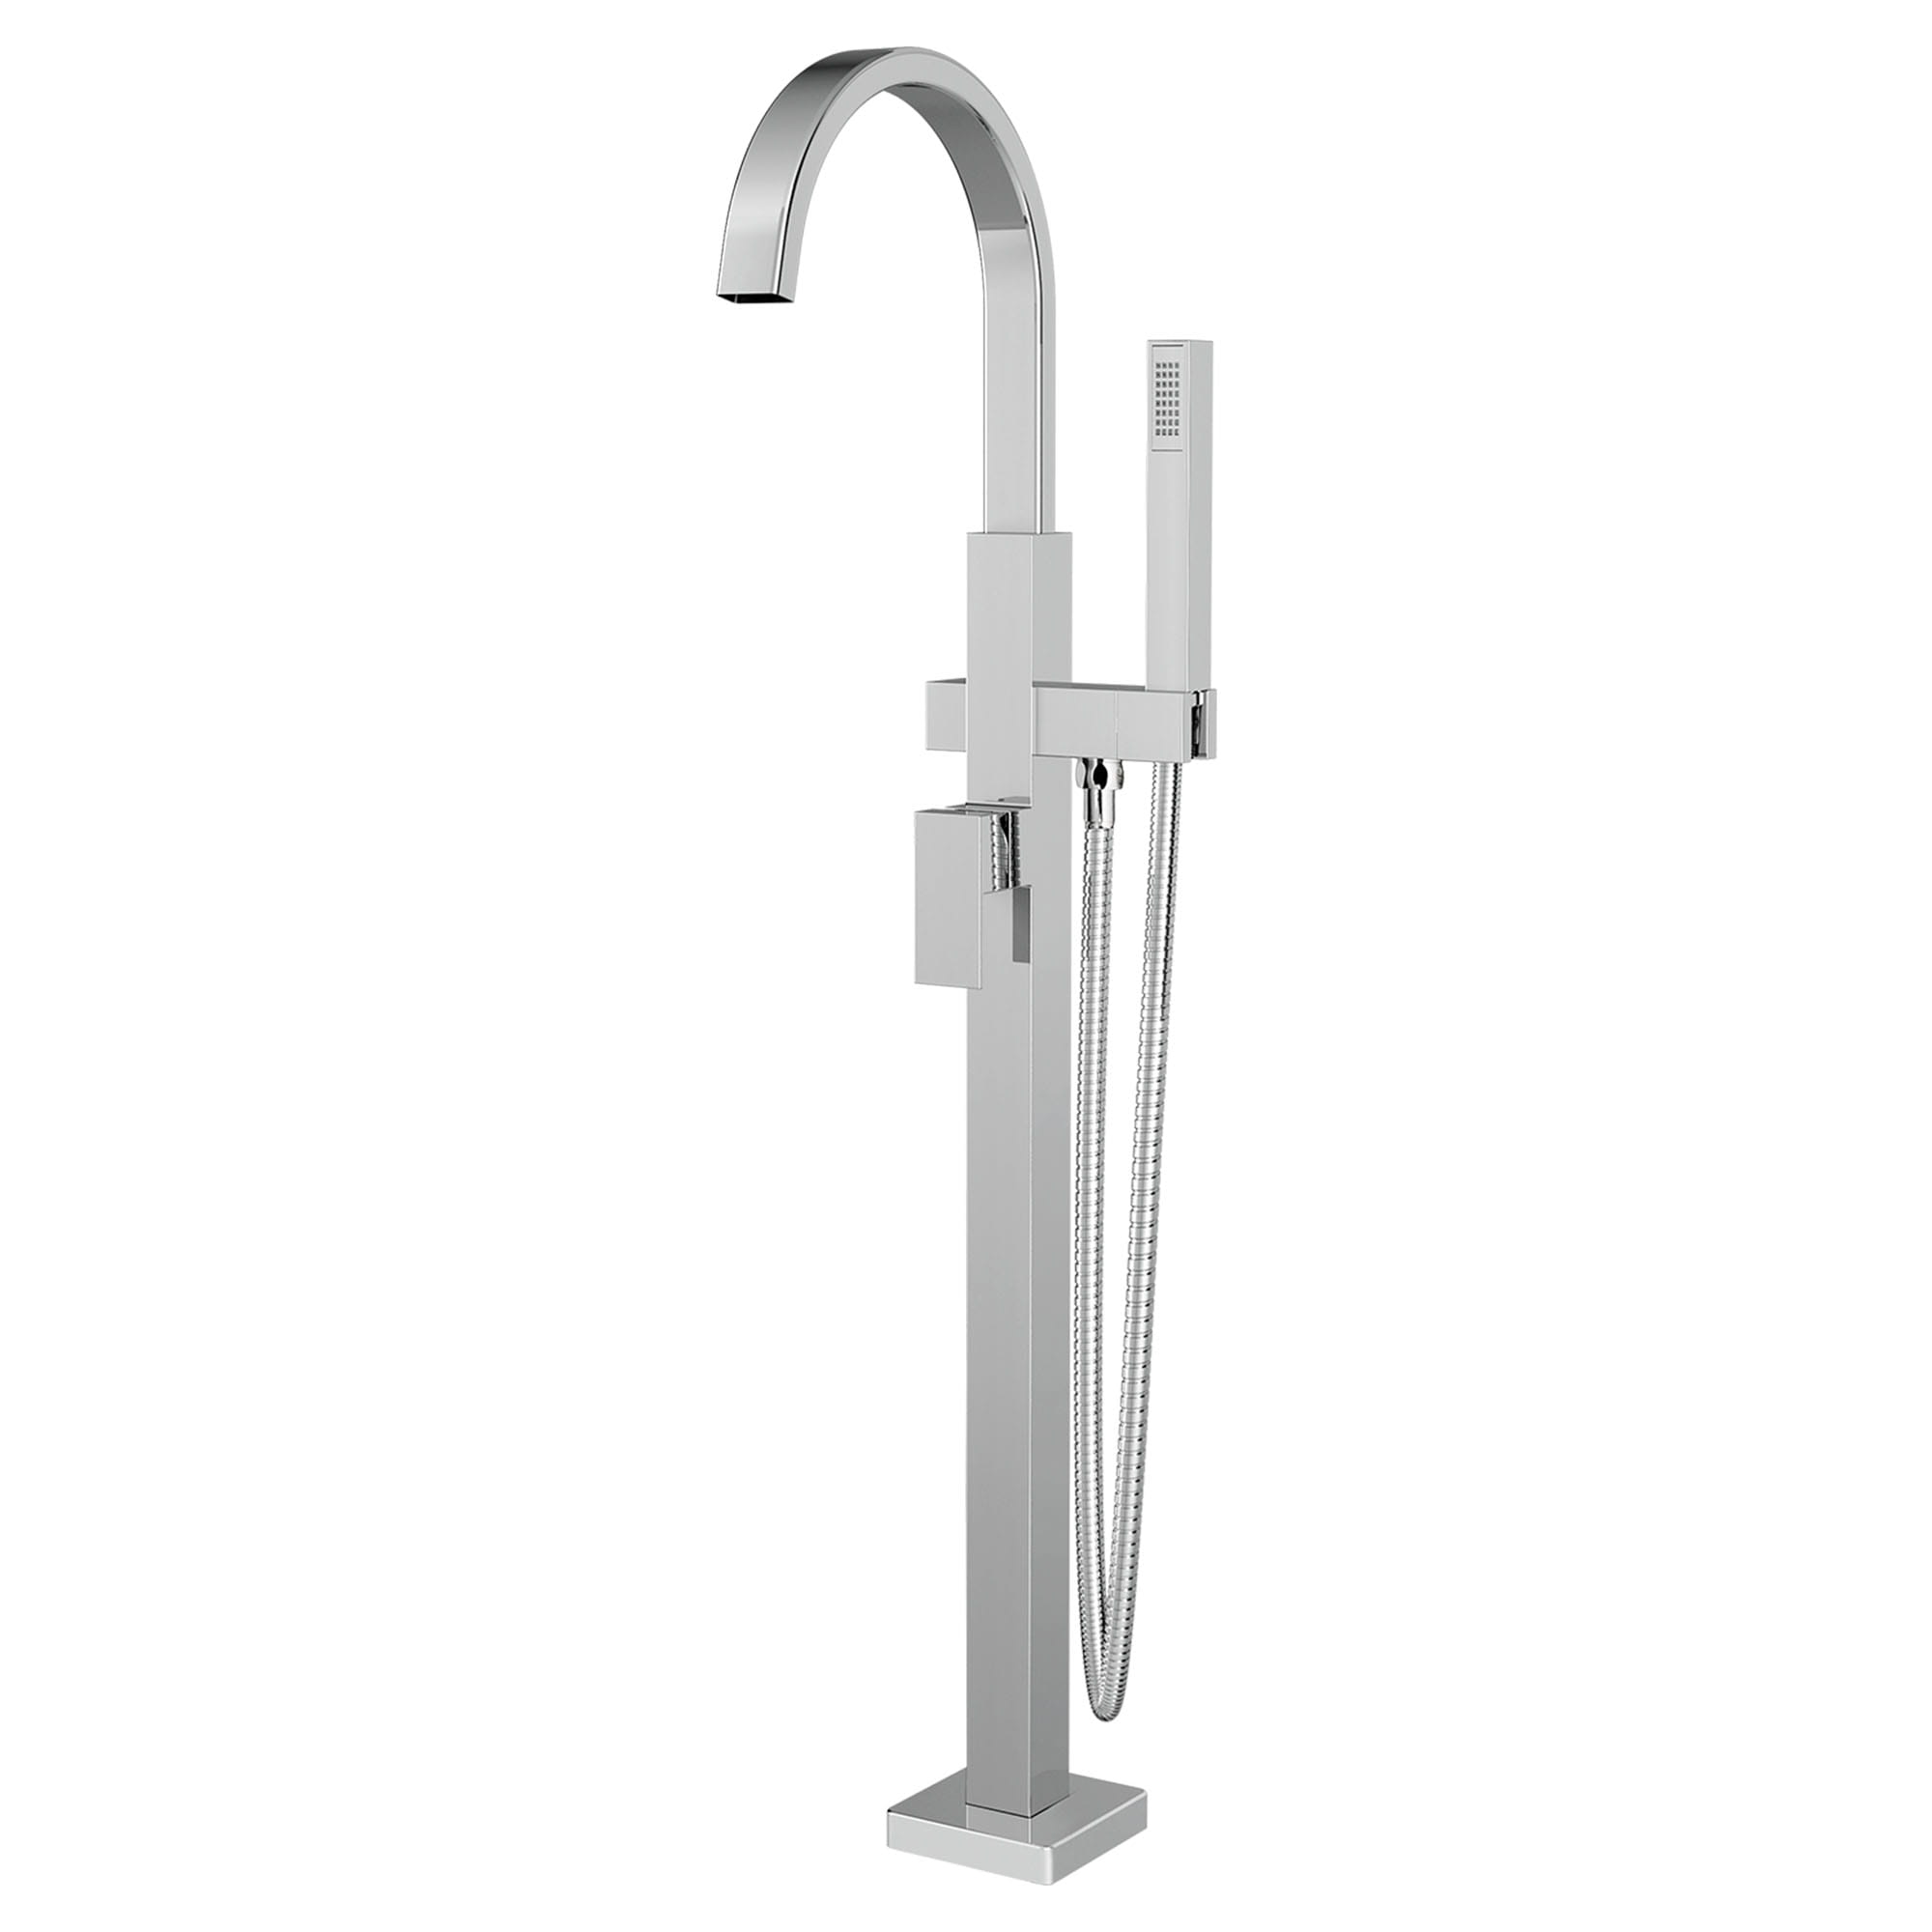 Times Square Contemporary Square Freestanding Tub Faucet with Personal Shower for Flash Rough in Valve with Lever Handle CHROME